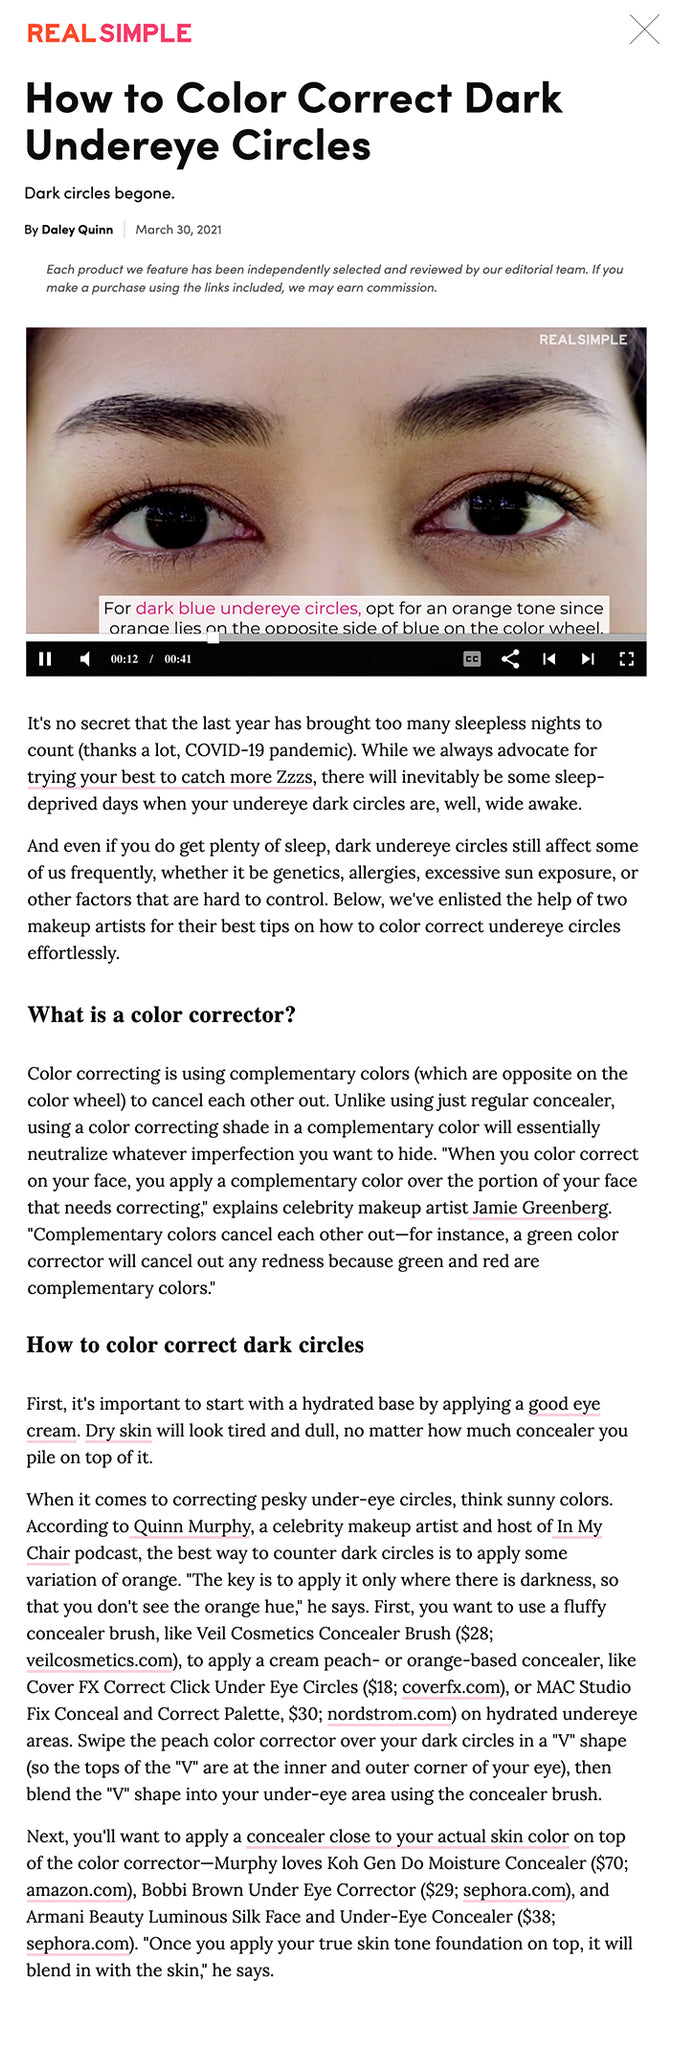 How to Color Correct Dark Undereye Circles Dark circles begone.  By Daley Quinn March 30, 2021 Each product we feature has been independently selected and reviewed by our editorial team. If you make a purchase using the links included, we may earn commission.   ADVERTISEMENT  You might like×  Ask a Beauty Editor: What Is the Best Concealer for Mature Undereyes?  Can Eye Cream Double as Moisturizer (and Vice Versa)?  How To Clean a Can Opener  How Often You Should Wash Your Towels-and How to Do It, According to Experts  Set Your Alarm One Hour Earlier to Reduce Your Risk of Depression, Sleep Study Suggests  How to Talk About Sex With Your LGBTQIA+ Child  How to Save Money on College Tuition  9 Eye-Opening Inaccuracies You Probably Believe About Eating Eggs  How to Cook With Kelp, Kale's Sea-Based Best Friend  4 Ways to Adopt Regenerative Agriculture in Your Own Garden  This Is Why Bug Bites Itch So Darn Much-and Your 8 Best Options for Relief  How to Clean Electronics  What You Need to Know About the New Study on Toxic Chemicals in Makeup  The Dangerous Trap of Toxic Productivity-and How to Break the Cycle  Weddings Are Back in Full Force-Here's How to Avoid Overspending as an Overbooked Wedding Guest  Think Rich, Get Rich: How Critical Thinking Can Increase Wealth  10 Top Hairstyles for Summer 2021, According to Hairstylists  The Ultimate Guide to Eco-Friendly Paint Projects  5 Tips for Summer Backyard Entertaining on a Budget  How to Choose an LGBTQ-Inclusive Financial Professional  How to Incorporate Sunscreen Into Your Beauty Routine This Summer  How to Invest in LGBTQ Causes  How to Negotiate Car Prices  Amazon Prime Day 2021 Is on the Way: Here's How to Prepare  How a 'Mini Retirement' Sabbatical Can Be Good for the Soul-and Your Career  5 Ways to Eat More Kale When You Don't Want a Salad  8 Spectacular U.S. Campgrounds to Explore This Summer With Family, Friends, or Solo  How to Pick the Perfect White Paint Color for Your Space  Why Women Need to Be Financially Planning for a 100-Year Life  How to Invest in BIPOC-Owned Companies  We Tried the Creamy Lemonade Recipe Trending on TikTok-and We Have a Few Thoughts  A Guide to Understanding Beauty Label Lingo, From 'Hypoallergenic' to 'Clinically Tested'  How to Create Perfect Mermaid Waves  Sustainable Beauty Routine  Great Recipes From the July Issue of Real Simple  Here’s How EFT Tapping Works  Check Your Freezer: The USDA Says These Frozen Breaded Chicken Products May Be Contaminate  7 Things First-Time Home Buyers Wish They Knew  How To Clean An Iron in 4 Easy Steps | Spotless | Real Simple  7 Secrets Real Estate Pros Know to Get the Best Deal on a Home  How to Regain Your Financial Footing When Life Gives You Lemons  Hydrangea Arranging Ideas and Tricks for a Long-Lasting (and Lovely) Bouquet  24 Great Shows on Netflix to Watch This June  8 Ways to Stay Healthy if You Sit at a Computer All Day, Every Day  People Who Retired Before Age 45 Share How They Did It  What Is Geographic Arbitrage-and How Can You Pull it Off?  8 Common Home Staging Mistakes to Avoid, According to the Pros  The Best Ways to Cope With Invasive, Racing Thoughts  Tips to Find Affordable Therapy It's no secret that the last year has brought too many sleepless nights to count (thanks a lot, COVID-19 pandemic). While we always advocate for trying your best to catch more Zzzs, there will inevitably be some sleep-deprived days when your undereye dark circles are, well, wide awake.    And even if you do get plenty of sleep, dark undereye circles still affect some of us frequently, whether it be genetics, allergies, excessive sun exposure, or other factors that are hard to control. Below, we've enlisted the help of two makeup artists for their best tips on how to color correct undereye circles effortlessly.    What is a color corrector?  Color correcting is using complementary colors (which are opposite on the color wheel) to cancel each other out. Unlike using just regular concealer, using a color correcting shade in a complementary color will essentially neutralize whatever imperfection you want to hide. "When you color correct on your face, you apply a complementary color over the portion of your face that needs correcting," explains celebrity makeup artist Jamie Greenberg. "Complementary colors cancel each other out—for instance, a green color corrector will cancel out any redness because green and red are complementary colors."   ADVERTISING  How to find the right color corrector for your skin tone Color correctors can feel quite intimidating, especially because many of them come in vibrant rainbow hues that look like they don't belong on your face. If you have dark blue undereye circles, you want to opt for an orange or peach color corrector, since orange lies on the opposite side of blue on the color wheel. "To find the right color-corrector for your skin, saturation plays a role," says Greenberg. "For instance, if your skin tone is lighter, you must use the lighter version and so forth." Test the product in natural daylight and use the side of your face to try the product to make sure it's a good match—lighter skin tones should use a peach shade, while darker skin tones should try an orange shade.     How to color correct dark circles First, it's important to start with a hydrated base by applying a good eye cream. Dry skin will look tired and dull, no matter how much concealer you pile on top of it.  When it comes to correcting pesky under-eye circles, think sunny colors. According to Quinn Murphy, a celebrity makeup artist and host of In My Chair podcast, the best way to counter dark circles is to apply some variation of orange. "The key is to apply it only where there is darkness, so that you don't see the orange hue," he says. First, you want to use a fluffy concealer brush, like Veil Cosmetics Concealer Brush ($28; veilcosmetics.com), to apply a cream peach- or orange-based concealer, like Cover FX Correct Click Under Eye Circles ($18; coverfx.com), or MAC Studio Fix Conceal and Correct Palette, $30; nordstrom.com) on hydrated undereye areas. Swipe the peach color corrector over your dark circles in a "V" shape (so the tops of the "V" are at the inner and outer corner of your eye), then blend the "V" shape into your under-eye area using the concealer brush.  Next, you'll want to apply a concealer close to your actual skin color on top of the color corrector—Murphy loves Koh Gen Do Moisture Concealer ($70; amazon.com), Bobbi Brown Under Eye Corrector ($29; sephora.com), and Armani Beauty Luminous Silk Face and Under-Eye Concealer ($38; sephora.com). "Once you apply your true skin tone foundation on top, it will blend in with the skin," he says.  RELATED: Eliminate Dark Under-Eye Circles with This Step-by-Step Tutorial on How to Apply Concealer  If you have dry undereyes, Murphy suggests staying away from powders. But if you tend to have oiler skin and find your foundation sweats off throughout the day, a light dusting of translucent powder can help. "Colorescience's Mineral Corrector Palette SPF 20 ($56; dermstore.com) is a great powder palette that you can use under the eyes and on blemishes," says Murphy.   Keep in mind not to apply too much product on your undereye area. "Start light, as if you were painting a pointillist," says Greenberg. "The easiest and most popular mistake is layering too much, which creates another concern to deal with (read: clumpy concealer that counterproductively makes you look more tired)."  RELATED: 7 Ways to Get Rid of Dark Circles Under Your Eyes  By Daley Quinn Popular in Makeup best-bronzer: makeup brushes and bronzers Pin We Tried Dozens of Bronzers-These Are the 10 Best for a Post-Vacation Glow  Article Haley Cairo's sustainable beauty tips Pin Easy Tips for Making Your Beauty Routine More Sustainable  Video How to Create a Cozy Backyard Lounge PAID CONTENT How to Create a Cozy Backyard Lounge From Sunbrella best-bb-creams Pin 12 Best BB Creams With Skincare Benefits  Article Becca Cosmetics Under Eye Brightening Corrector Pin One Unexpected Feature Makes This Dark Circle Corrector Wildly Effective  Article zara-beauty Pin Zara Just Launched an Eco-Conscious, Inclusive New Makeup Line  Article best-drugstore-powders-1 Pin We Tried Dozens of Drugstore Powders-These Are the 5 Best (and They're All Under $15!)  Article  Pin How to Waterproof Makeup That’s Not Actually Waterproof   Video  Pin How to Grow Back Overplucked Eyebrows  Video  Pin 6 Advanced Makeup Mirrors That Will Completely Change the Way You Do Makeup  Article  Pin The Non-Toxic Cookware with a 150,000-Person Waitlist Just Dropped in Three New Colors for Summer  Article  Pin 9 Eco-Friendly Beauty Products That Make Sustainable Living Easy  Article  Pin How to Color Match Your Foundation Online (No Matter Your Skin Tone)  Video  Pin 6 Best Setting Sprays to Keep Your Makeup on Your Face (and Not Your Mask)  Video  Pin We Tried Over 50 CC Creams—These Are the 5 Best  Article  Pin 7 Hair and Makeup Looks From Bridgerton That Are Totally Wearable Today  Video  Pin Here Are the Winners of the Real Simple Smart Beauty Awards 2021  Article  Pin 6 Products Real Simple's Beauty Director Keeps on Her WFH Desk  Article  Pin How to Build the Ultimate Capsule Makeup Collection  Video  Pin This Anti-Aging Concealer Erases Dark Circles—and It's Only $7 Right Now  Video All Topics in Makeup HAIR CLOTHING MAKEUP SKINCARE MAKEOVERS & TIPS CLOTHING CARE SHOES & ACCESSORIES FRAGRANCE FOUNDATION, POWDER, & MORE EYE MAKEUP LIPS  Scroll Down For the Next Article  REAL SIMPLE STYLE & BEAUTY MAKEUP 5 Ways to Ease Back Into Your Beauty Routine Resuming a pre-quarantine beauty routine doesn’t have to be stressful.  By Hana Hong Each product we feature has been independently selected and reviewed by our editorial team. If you make a purchase using the links included, we may earn commission.   ADVERTISEMENT  CREDIT: GETTY IMAGES As life slowly returns to normalcy (and we prepare to see humans beyond the Zoom world), it's becoming clear that a lot of things are going to change. For people going back to the office, that means no more working on the couch in pajama pants and unbrushed hair. We're pulling out the blazers and high heels once again, and bringing our lipsticks and eyeliner back into the limelight.   There are degrees of both excitement and anxiety around reinstating our beauty rituals, however. (Let's be honest, we've all kind of enjoyed not having to do a full face of makeup every morning before 9 a.m.) But starting a beauty routine, even after a whole year of not having one, doesn't have to feel overwhelming, nor do you have to go back to the same level of maintenance you did before. The pandemic has allowed us to prioritize the things that matter, and the same concept can be applied to your beauty ritual. The key is to filter out things that don't "spark joy" (as Marie Kondo would put it), and only preserve the practices that lend themselves to self-care. Here are some tips for transitioning to a low-maintenance but transformative beauty routine.  Related Items 1 Spritz a summery fragrance. There are many things that directly affect our mood, but perhaps one of the strongest correlations is our sense of smell. If you've been feeling the social pressure lately (who hasn't?), a soothing fragrance can quell your stress levels and keep you grounded when you have to leave the confines of your home. If you're not a fan of mists and sprays, don't worry-there are tons of unconventional ways to apply fragrance that work equally as well.  2 Wear tinted sunscreen. UV rays don't take a break, so neither should your SPF routine. Heavy foundations can feel thick and uncomfortable on your skin after a year of going bare, but a tinted formula can give your face the sun protection it needs and smooth your complexion to boot. Friendly reminder that you should be applying a quarter-sized dollop of at least SPF 30 to be fully protected-so if your formula is more tint than screen, consider implementing an additional layer of sunscreen underneath.  3 Give hair some TLC. Has your hair taken a toll from a year of no salon visits? We tend to focus on the hair growing out of it, but the reality is that most of our hair problems stem from the scalp itself. The good news: With ingredients that were once reserved for our faces now being repurposed for our hair, it's easier than ever to find at-home haircare products that do more than make our strands smell good. Look for ingredients like hyaluronic acid and micellar water, both of which will help restore lost moisture, and formulas that are pH-balanced and UV-protective.    If your hair has suffered from lack of attention over the past year, repair the damage with Redken's Acidic Bonding Concentrate Shampoo, Conditioner, and Perfecting Leave-In Treatment. Specifically formulated with an acidic pH, they work together to defend against the negative effects of water, hair coloring, and styling tools.  SPONSORED BY REDKEN Related Items 1 Find a bright lipstick. There's a reason why the saying exists: Give a girl the right lipstick and she can conquer the world. Although we all have our personal makeup preferences, perhaps the most universally acclaimed beauty item (loved by both third-graders and grandmas alike) is a good lip product. There's something magical about applying a bright, bold lipstick-not only does it make you feel more confident, put-together, and empowered, studies have shown that it also makes other people perceive you as such.  RELATED: The Surprising-and Significant-History of Red Lipstick  2 Indulge in a relaxing foot soak. If you're looking to get your feet sandal-ready, eliminate unsightly calluses with an Epsom salt bath. Aside from the obvious that they feel amazing (the magnesium eases aches and pains), they also soften the dead skin that lingers on feet, making subsequent exfoliation much more effective. Plus, you can do it all from the comfort of your bathroom; simply draw water into a basin, pour in the Epsom salt, and soak your feet for 15 to 20 minutes. Afterwards, you can use a pumice stone or foot brush to gently exfoliate dead skin.   Scroll Down For the Next Article  REAL SIMPLE STYLE & BEAUTY MAKEUP Try This Easy Natural Everyday Makeup Routine (That Never Feels Cakey) On this week's episode of Simply, host Haley Cairo shares her secret for makeup that looks completely natural—and like you're not even wearing any makeup.  By Lisa Milbrand Each product we feature has been independently selected and reviewed by our editorial team. If you make a purchase using the links included, we may earn commission.   ADVERTISEMENT   As we're starting to step away from the Zoom calls and back out into society, your makeup routine may need a refresh. And Simply host Haley Cairo may have the perfect natural makeup routine that looks like you—only enhanced.  Rather than a heavy foundation, Haley opts for a softer, multifunctional primer lotion that includes SPF to help simplify her daily routine. A soft pink concealer helps smooth away dark circles, without creating an unnatural look beneath the eye.  Bronzer, applied to the areas where the sun would normally hit her skin, adds a sun-kissed glow. Dabs of blush and highlighter help soften and highlight cheekbones and her eyes, while a light hand with the brow pencil and shadow bring definition to the eyes without looking overdone.  Try some of these products to help you get the look.  Related Items  Credit: sephora.com 1 Supergoop Glow Screen  $36; SEPHORA.COM This primer lotion gives skin a luminescent glow—along with SPF 40 sun and blue light protection.     Credit: sephora.com 2 IT Cosmetics CC+ Cream with SPF 50+ $40; SEPHORA.COM Haley likes to mix in this SPF 50 CC+ cream with her daily Glow Screen for a little extra coverage.   Credit: beccacosmetics.com 3 Becca Cosmetics Under Eye Brightening Corrector $32; BECCACOSMETICS.COM A soft pink concealer does a better job of masking blue under-eye circles, without looking fake and patchy.    Credit: sephora.com 4 Laura Mercier Translucent Loose Setting Powder $40; SEPHORA.COM Keep your makeup from melting away with a quick dusting of setting powder.   Credit: sephora.com 5 Milk Makeup Hydro Grip Setting + Refreshing Spray $36; SEPHORA.COM Get glowing with this setting spray, which helps keep makeup in place for up to 12 hours, and adds a little glow.   Credit: sephora.com 6 Saie Dew Blush Liquid Cheek Blush $22; SEPHORA.COM A few dabs of this soft blush are all you need to create a dewy glow. It contains mulberry, elderberry, and evening primrose to help moisturize and brighten skin.   Credit: sephora.com 7 Saie Brow Butter Styling and Volumizing Eyebrow Gel $20; SEPHORA.COM Help keep errant brow hairs in place with this subtle brow gel.   Credit: sephora.com 8 Kosas Brow Pop Clean Dual-Action Defining Eyebrow Pencil $22; SEPHORA.COM This brow pencil comes with a thicker end for filling in sparse areas, and a thinner end for more precise definition.   Credit: sephora.com 9 Saie Dew Balm Bouncy Marshmallow Highlighter $18; SEPHORA.COM Dab a little of this natural highlighter into the corners of the eyes, along the top of the cheekbone, and anywhere else you want a glow.   Credit: sephora.com 10 Tarte SEA Breezy Cream Bronzer $29; SEPHORA.COM This soft, creamy bronzer helps add that sun-kissed look that's perfect for spring and summer.   Credit: sephora.com 11 Tarte SEA Breezy Blender Cream Bronzer Brush $29; SEPHORA.COM This brush is perfect for blending cream bronzer gently onto cheekbones.   Credit: sephora.com 12 Tarte Amazonian Clay Matte Waterproof Bronzer $30; SEPHORA.COM This clay-based bronzer is waterproof, so can last through workouts or a trip to the beach or pool.   Credit: amazon.com 13 Real Techniques Miracle Complexion Beauty Sponge Makeup Blender $14; AMAZON.COM Blending sponges help you get a softer, more natural look for your makeup—especially when you dampen them before you apply makeup.   Scroll Down For the Next Article  REAL SIMPLE STYLE & BEAUTY MAKEUP EYE MAKEUP Ask a Beauty Editor: What Is the Best Concealer for Mature Undereyes? Plus, how to cover fine lines and wrinkles with makeup.  By Hana Hong Each product we feature has been independently selected and reviewed by our editorial team. If you make a purchase using the links included, we may earn commission.   ADVERTISEMENT Save FB Tweet  More   Ever wanted to pick the brain of a beauty editor? Or get beauty product recommendations from someone who has tried them all? You've come to the right place. In our new weekly series, Ask a Beauty Editor, beauty editor Hana Hong answers your biggest skincare, haircare, and makeup questions, all submitted by Real Simple readers. Tune in every Tuesday and submit your own burning beauty questions here for a chance to be featured.  What is the perfect concealer for mature eyes? You know, someone with some wrinkles! - @sefginstl  There's honestly nothing worse (in the world of makeup, that is) than blending your concealer to perfection, only to glance in the mirror a few hours later and see that it has settled into every crease that you never knew existed.  Whether you call them wrinkles, creases, laugh lines, or crow's feet, we're all trying to hide those bad boys as much as possible. It's easier said than done, however—as you're probably well aware, fine lines are the actual worst to cover. That's because as opposed to hyperpigmentation which is flat, wrinkles are dents in skin, meaning you have to accomplish the near-impossible task of masking texture. The wrong concealer around the eyes can accentuate wrinkles, settling into creases and putting them front and center.   That being said, it is still doable! Before you jump into any concealer product, you should be applying a hydrating eye cream first. Not only will this prime your undereyes so makeup goes on better and stays longer (moisture plumps skin, FYI), it will also work to reduce the look of fine lines and wrinkles over time so you'll need less concealer.   CREDIT: GETTY IMAGES Now, when it comes to your undereyes, you're going to want to steer clear of powders (sorry). I can appreciate a matte finish, but it tends to settle into fine lines, drawing attention to the surface and making it look worse after a few hours. The best finish for wrinkles is dewy skin, which is usually best achieved with creamy liquid formulas. You should also scout makeup products that have skincare benefits infused, meaning that they'll not only work to disguise fine lines, but eliminate them in the process.   Although the formula that you apply plays a big part, I'd be remiss not to mention that the technique with which you apply it is equally—if not more—important. Here, I'll not only outline a couple concealer favorites, but the best way to apply them for effective results. Scroll on for some of the best makeup products for mature skin.   Related Items  1 OLEHENRIKSEN Banana Bright Face Primer $38, SEPHORA.COM Contrary to popular belief, color correctors aren't just for redness. A chiffon color corrector (this one has vitamin C for anti-aging benefits) helps to brighten skin, which can lessen the appearance of wrinkles by lifting darkness from that area. Don't worry that the color will clash with your skin tone—you’ll be following up with concealer to temper the yellowness. Add a pea-sized amount in the deepest part of the wrinkle, then use the warmth of your fingers to blend and melt the formula into the skin—makeup artists often recommend the ring finger since it has the lightest touch.   2 Maybelline Age Rewind Concealer $6, AMAZON.COM A drugstore gem and cult-favorite, you can do a lot of things with this anti-aging concealer thanks to its layer-able quality. Consistency is medium in coverage, but you can definitely build it up (sans cakiness) depending on how much you need. The formula also contains haloxyl, an effective blood circulation booster which is made of four different peptides that reduce the appearance of fine lines, wrinkles, and discoloration.  The concealer comes in a twist-to-apply format (the clicking sound as you twist up is super satisfying) with a sponge at the end that dispenses product. The only potential downside with this is that it’s difficult to control how much you apply, but it’s nothing that you can’t work around—just make sure to apply in thin layers (starting with a very tiny amount so it doesn’t look heavy) and blend generously with your fingers or an undereye concealer brush. Tip: Leave the concealer on the skin for a couple seconds to warm the product before blending—this will allow it to absorb better.  Feel free to use this concealer alone if your wrinkles aren’t that prominent, but if you need some extra coverage you can follow up with number three.  makeup-for-wrinkles-Nars Radiant Creamy Concealer  3 Nars Radiant Creamy Concealer $30, ULTA.COM While this guy doesn’t have anti-aging ingredients per se, you might want to use it if you need more coverage. As the name suggests, it’s super radiant thanks to light-diffusing mineral powder, which essentially breaks over your skin to leave a soft, even finish under your eyes. The formula is also very hydrating—which is a criterion for more mature skin since it tends to be drier. It has an uncanny ability to smooth over fine lines as it goes on, leaving the skin looking like a firmer, younger version of itself. Use the doe foot applicator to paint an upside-down triangle underneath your eyes, then dab lightly with your ring fingers to blend.